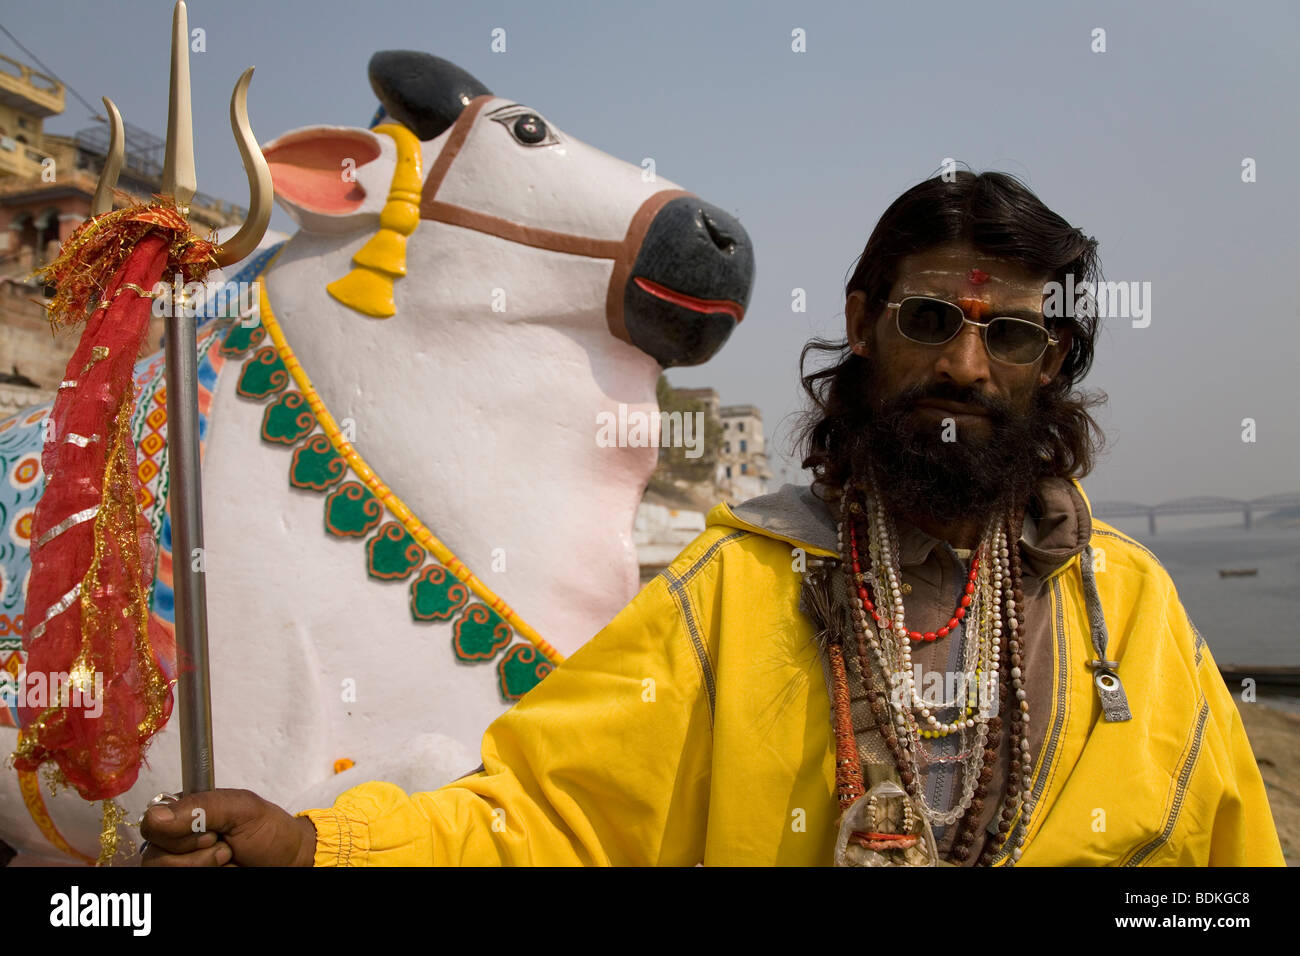 A Sadhu in the Indian city of Varanasi (Benares). He stands in front of a statue of Nandi, Shiva's vehicle. Stock Photo